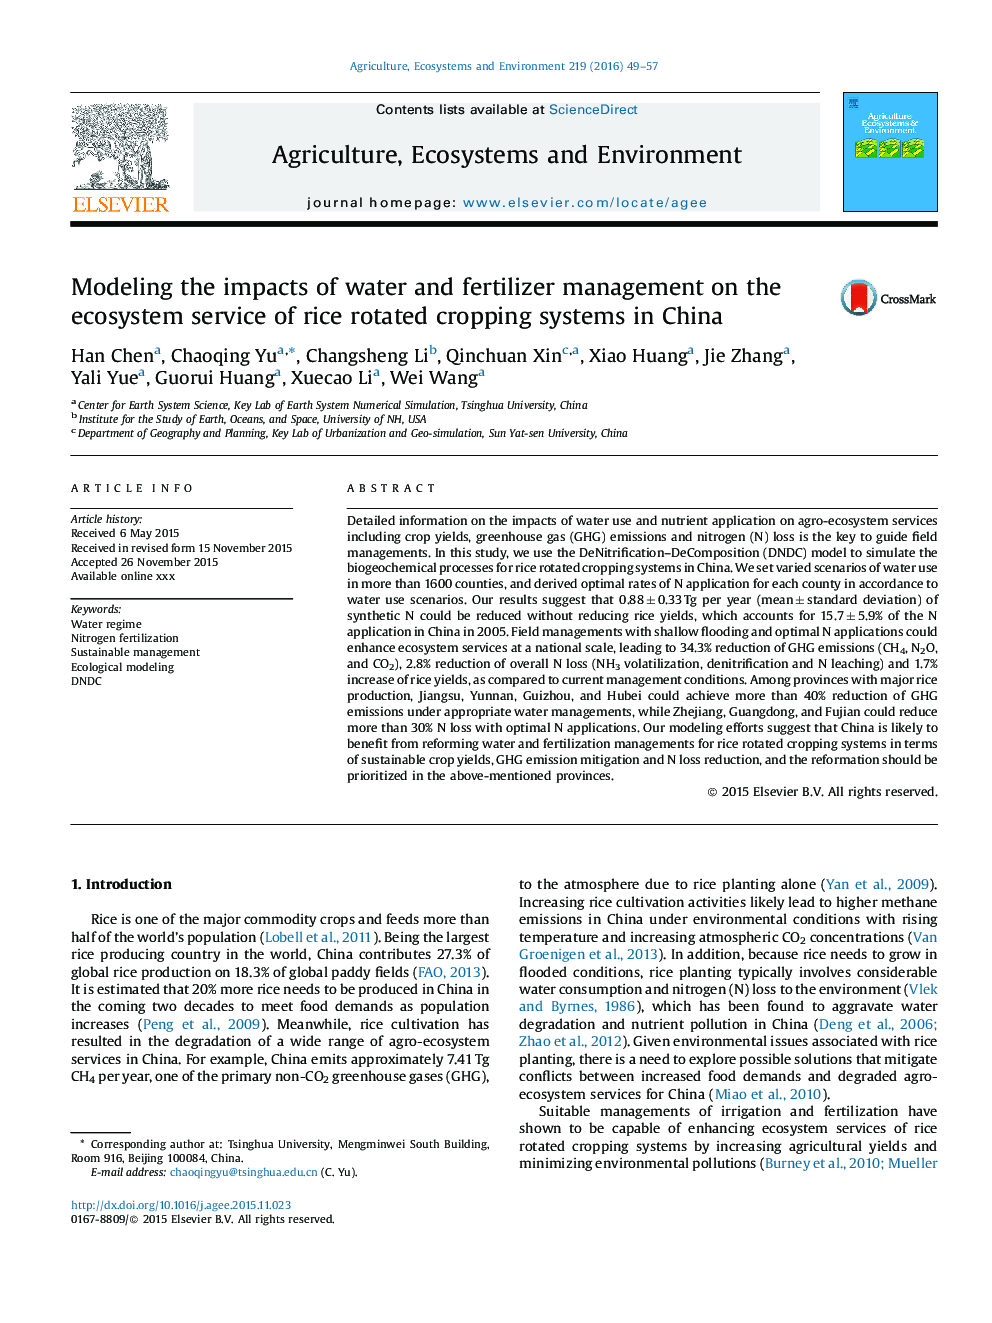 Modeling the impacts of water and fertilizer management on the ecosystem service of rice rotated cropping systems in China